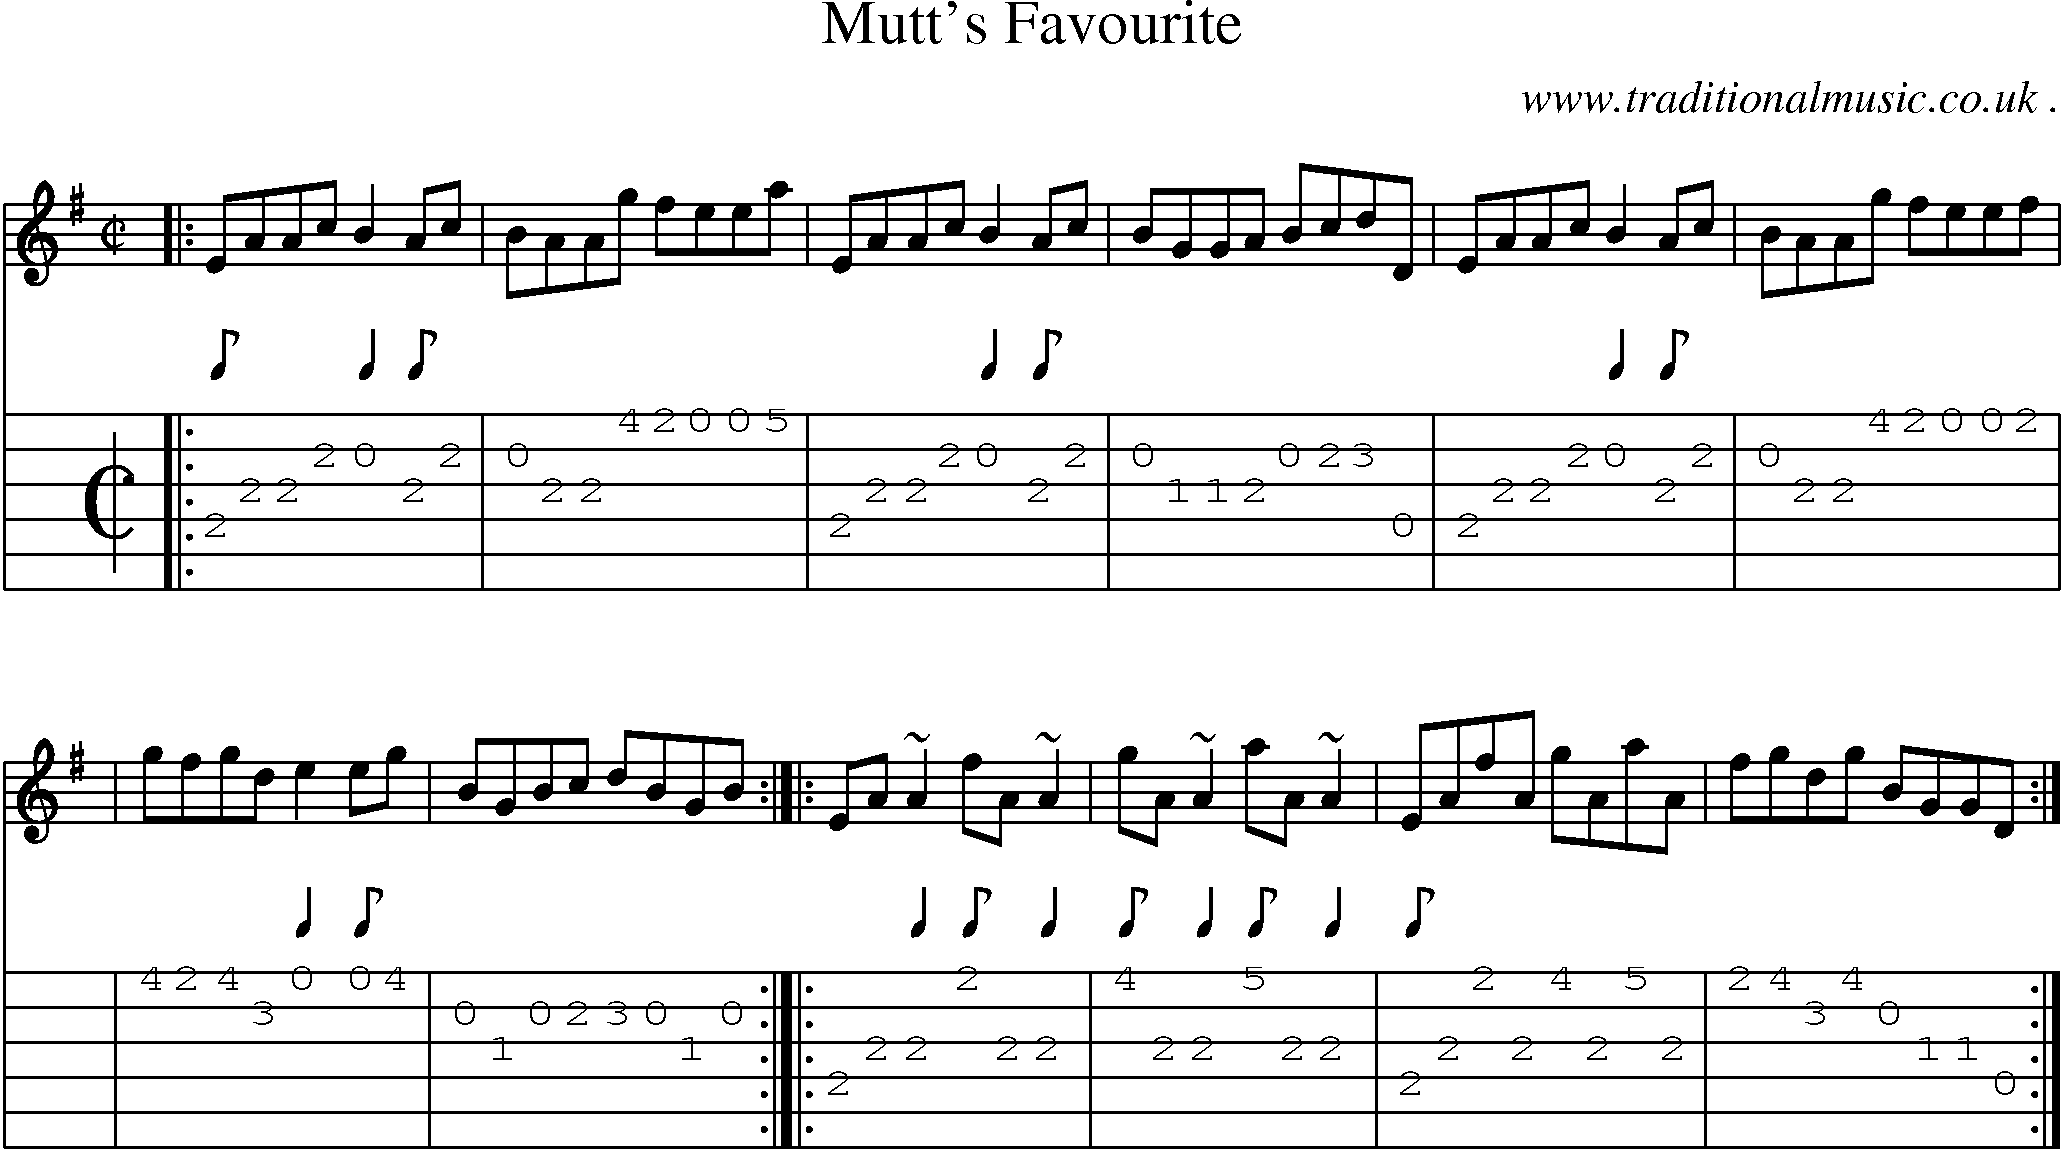 Sheet-music  score, Chords and Guitar Tabs for Mutts Favourite